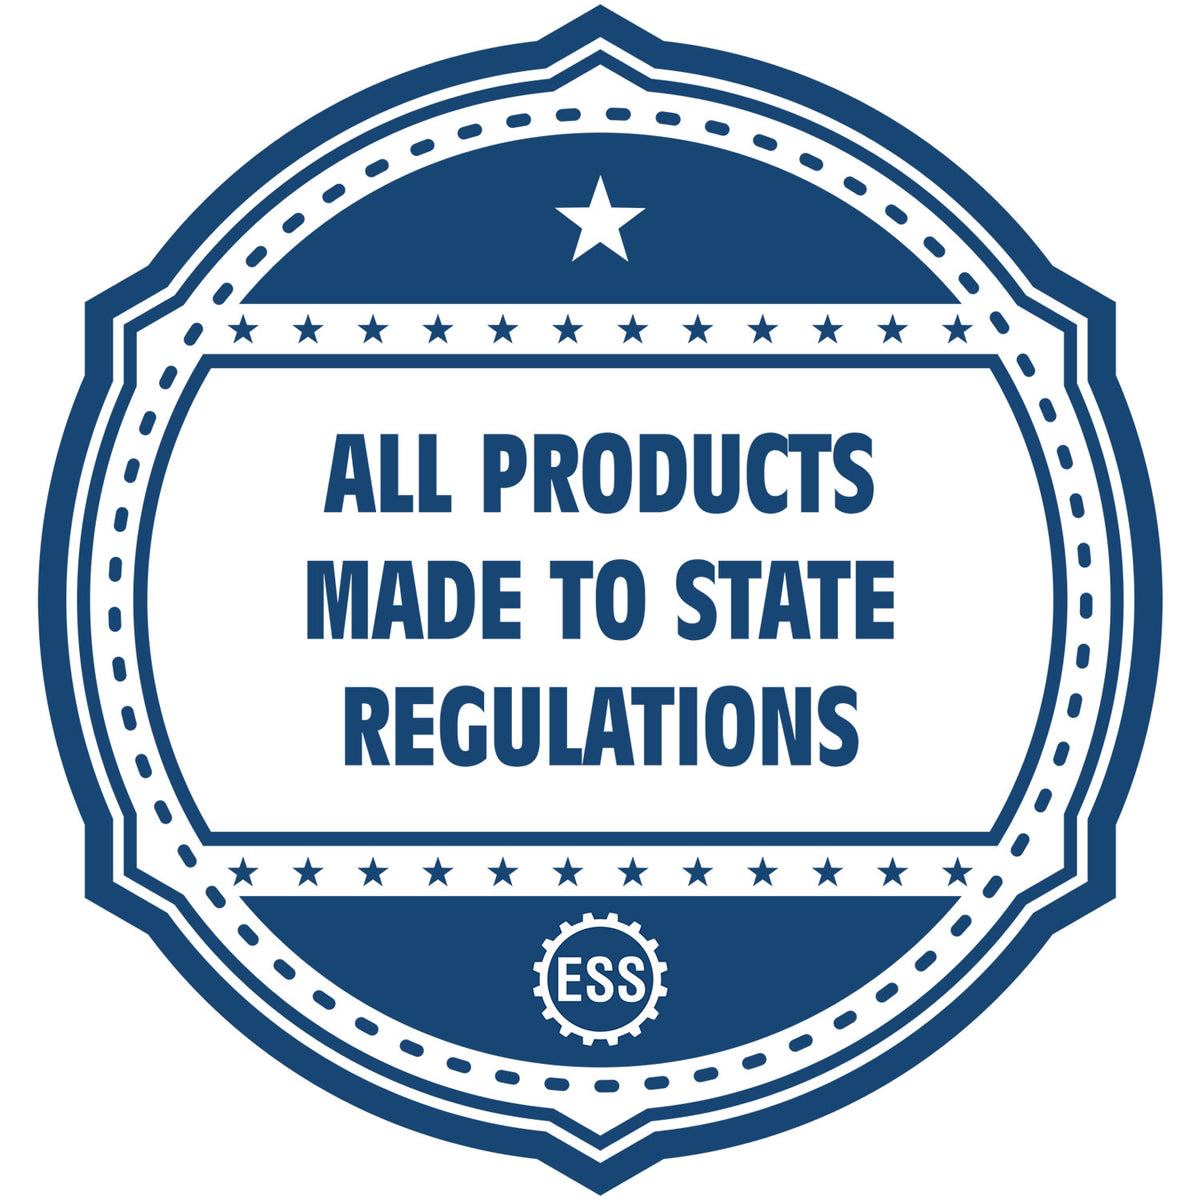 An icon or badge element for the Slim Pre-Inked Oklahoma Architect Seal Stamp showing that this product is made in compliance with state regulations.